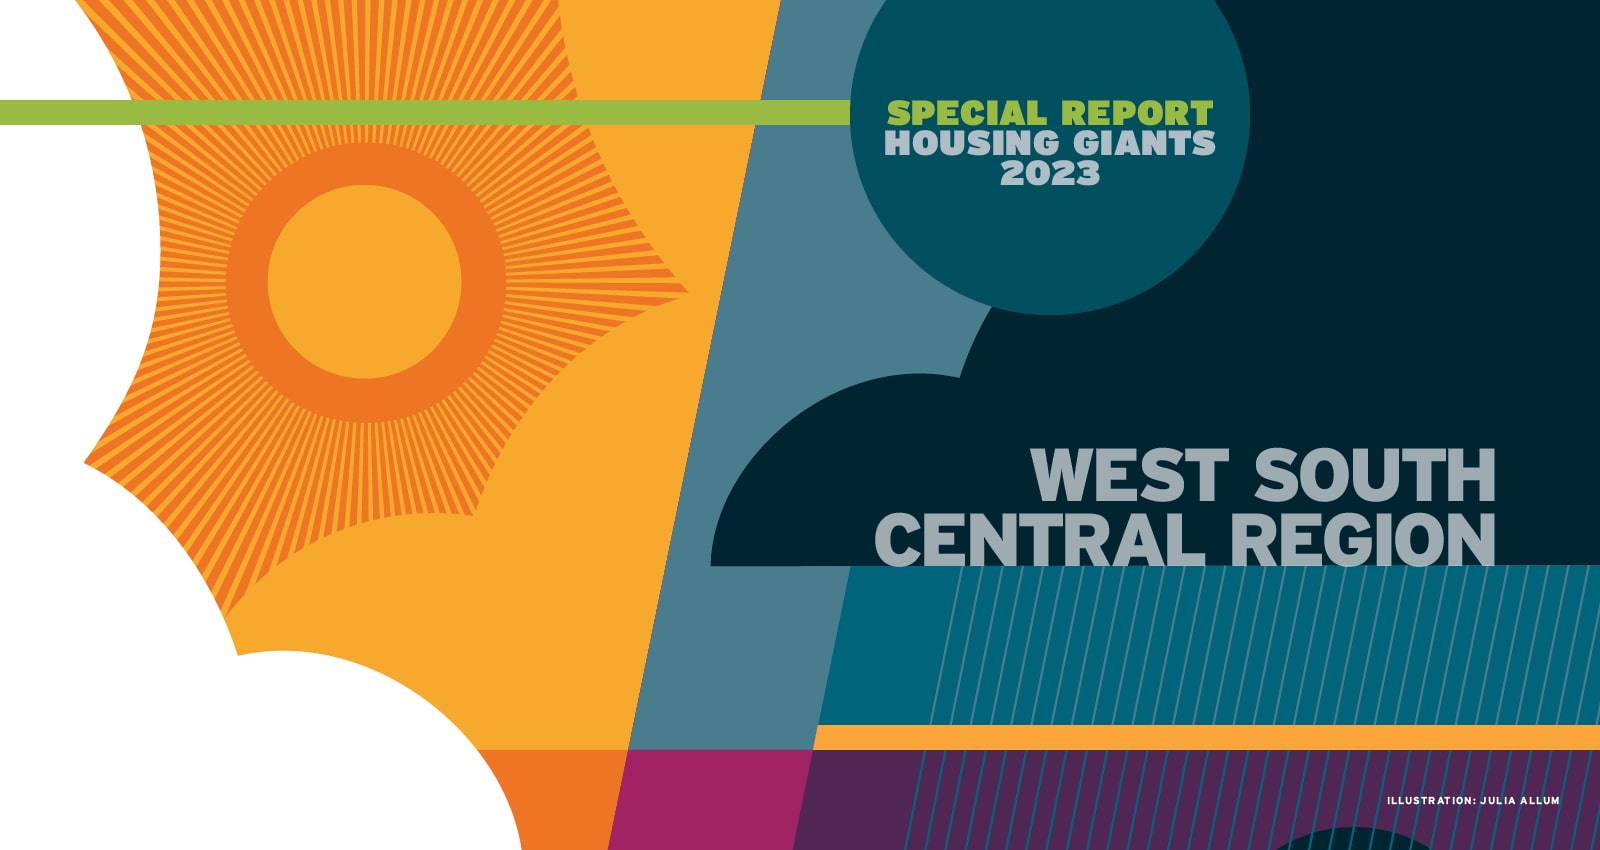 2023 Housing Giants ranked list of top builders in the West South Central region